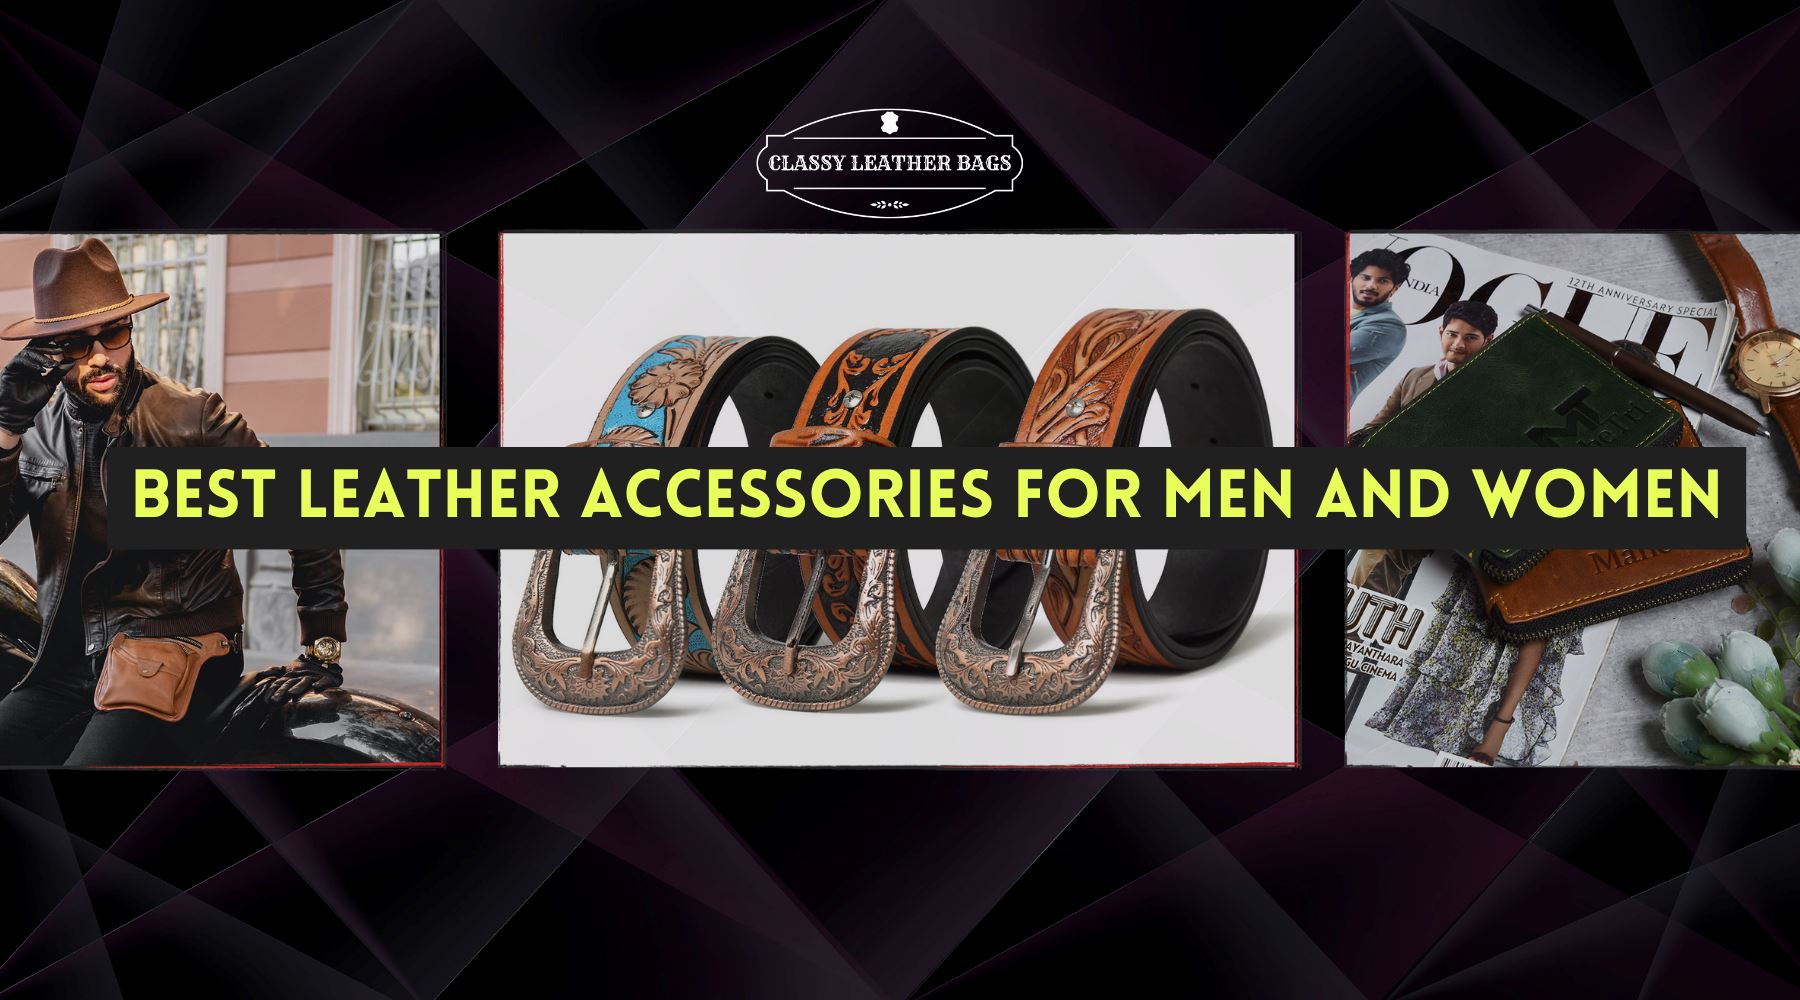 Best Leather Accessories for Men and Women